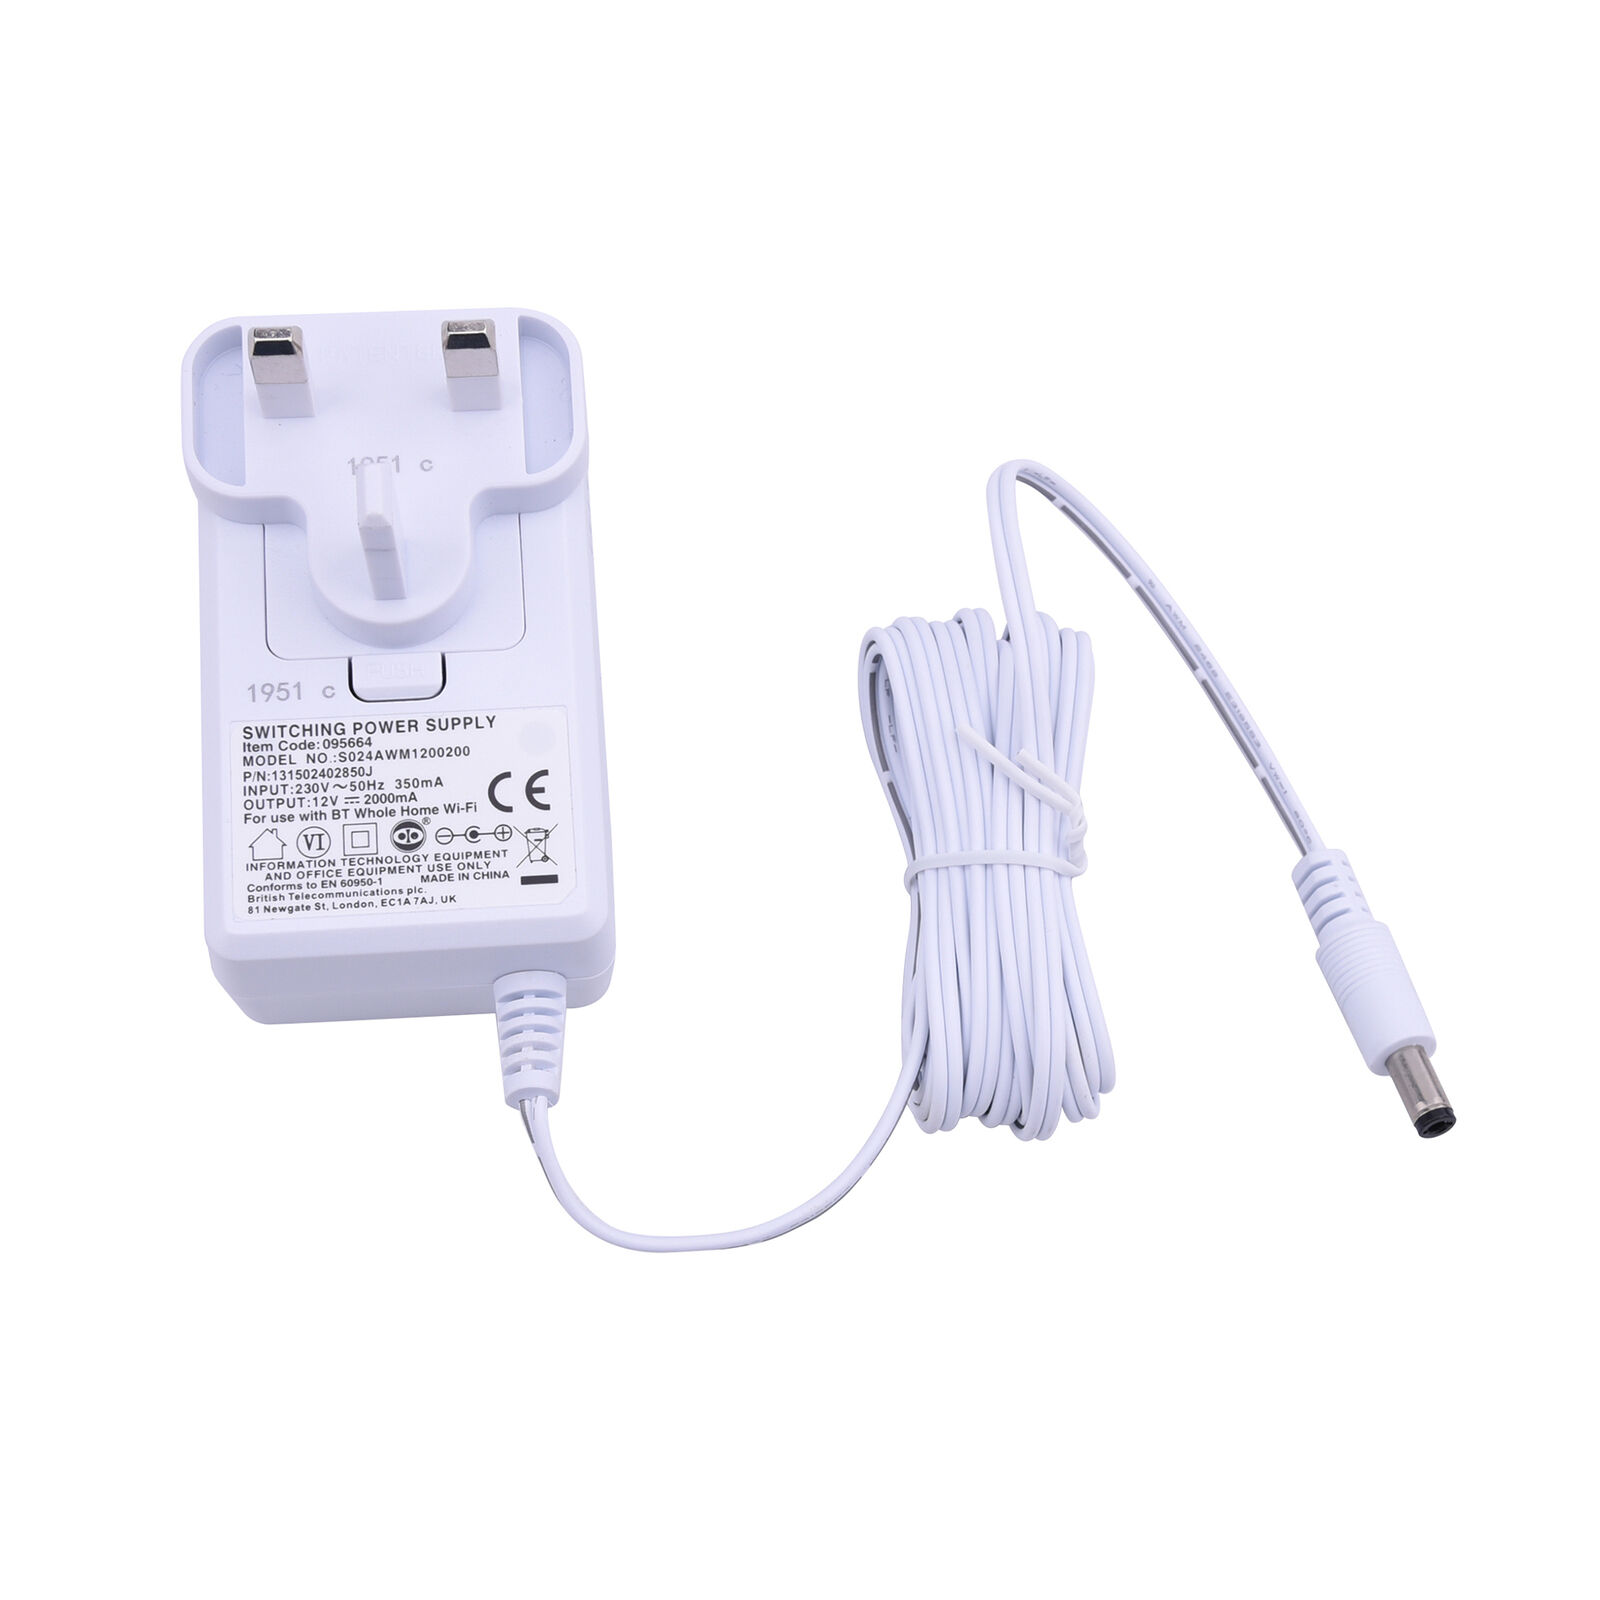 BT Power Supply 12V 2.5A AC Adapter for BT Whole Home Wi-Fi Brand BT Country/Region of Manufacture China MPN Does not a